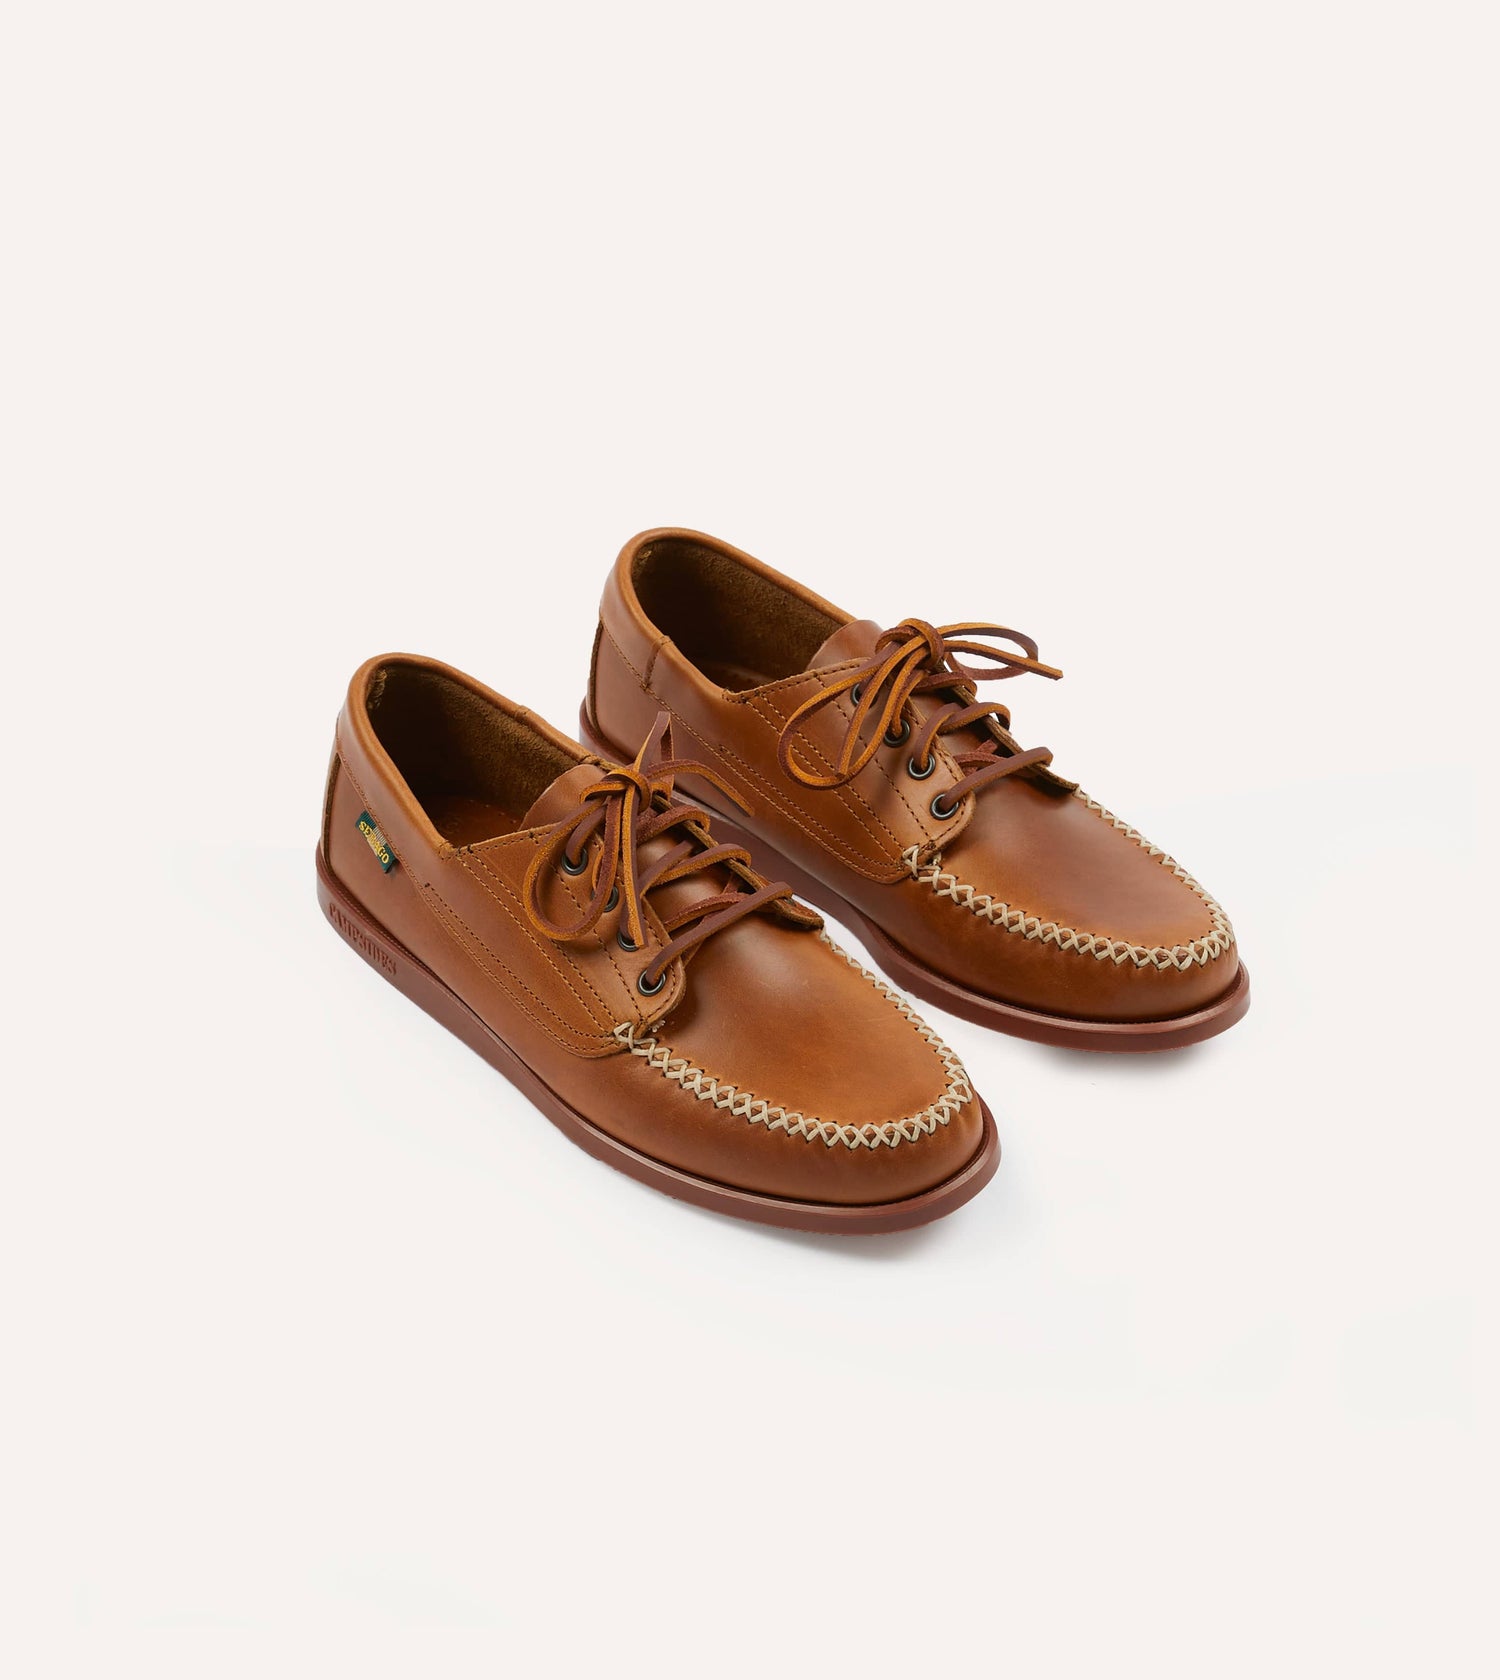 Drake's by Sebago Campsides Askook Waxed Leather Shoe